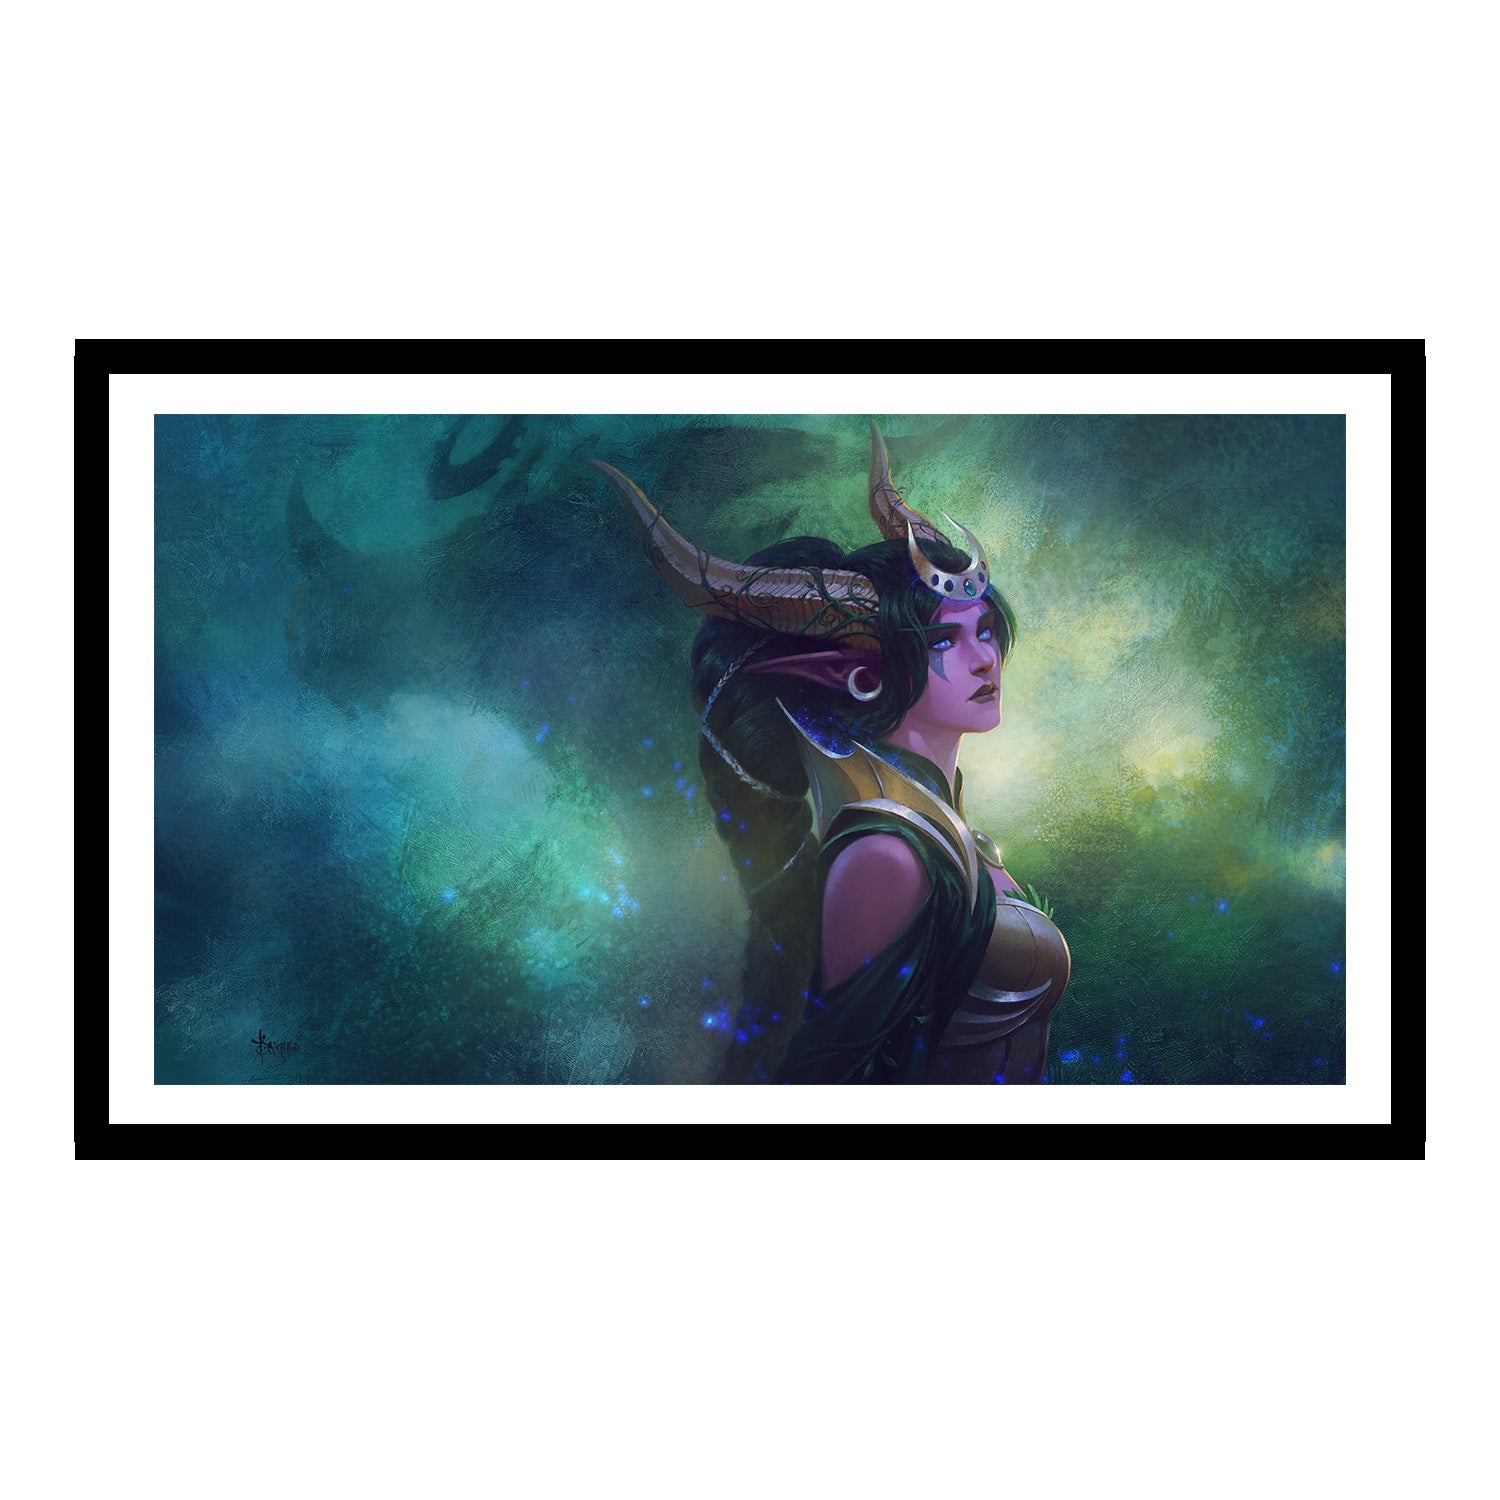 World of Warcraft Ysera 12x21 in Framed Art Print - Front View